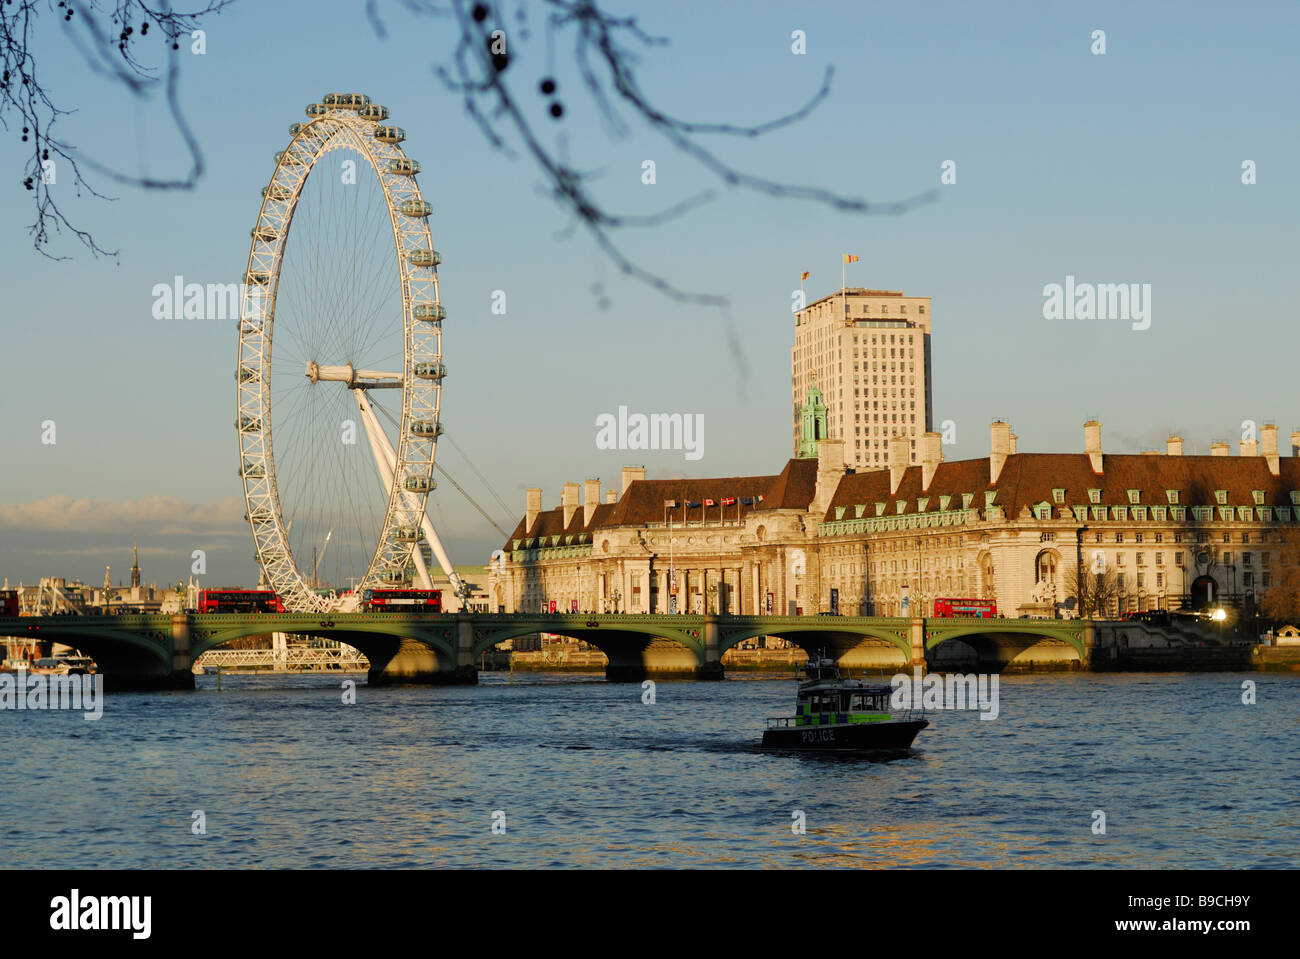 London Eye from across the River Thames in winter, London, England Stock Photo